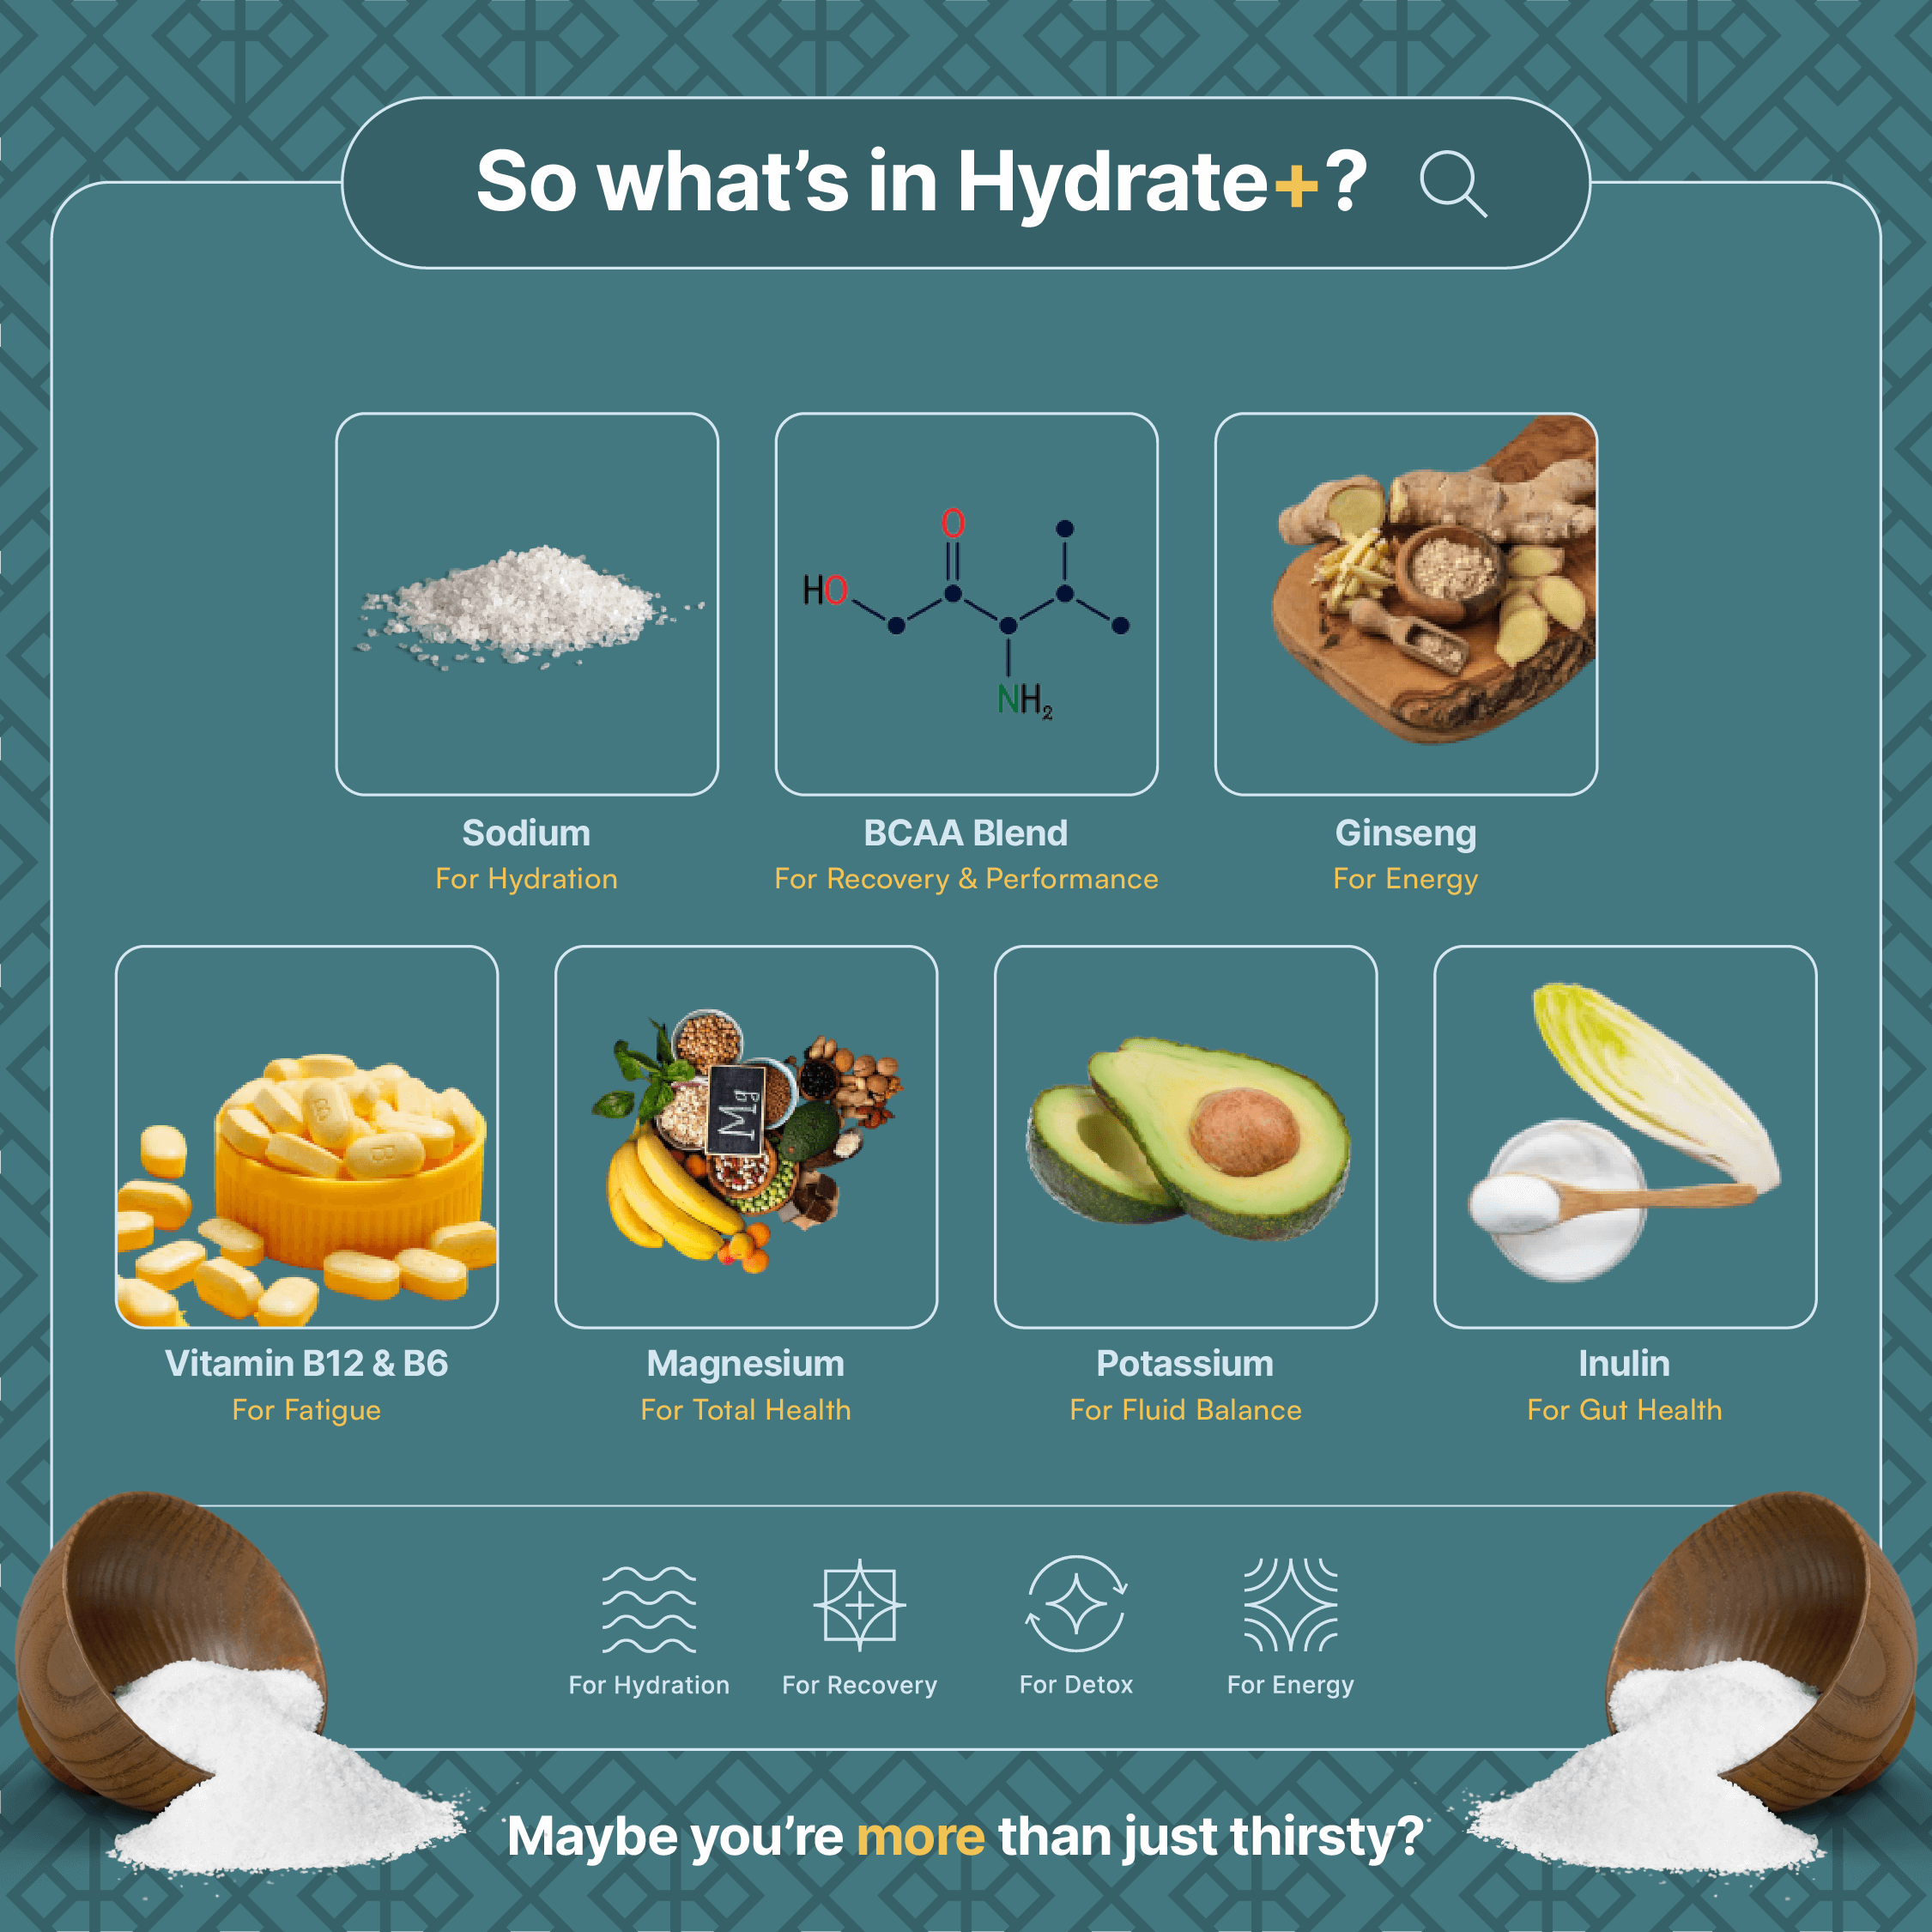 Hydrate+ contains sodium, BCAAs, ginseng, vitamins B12 and B6, magnesium, potassium and inulin.